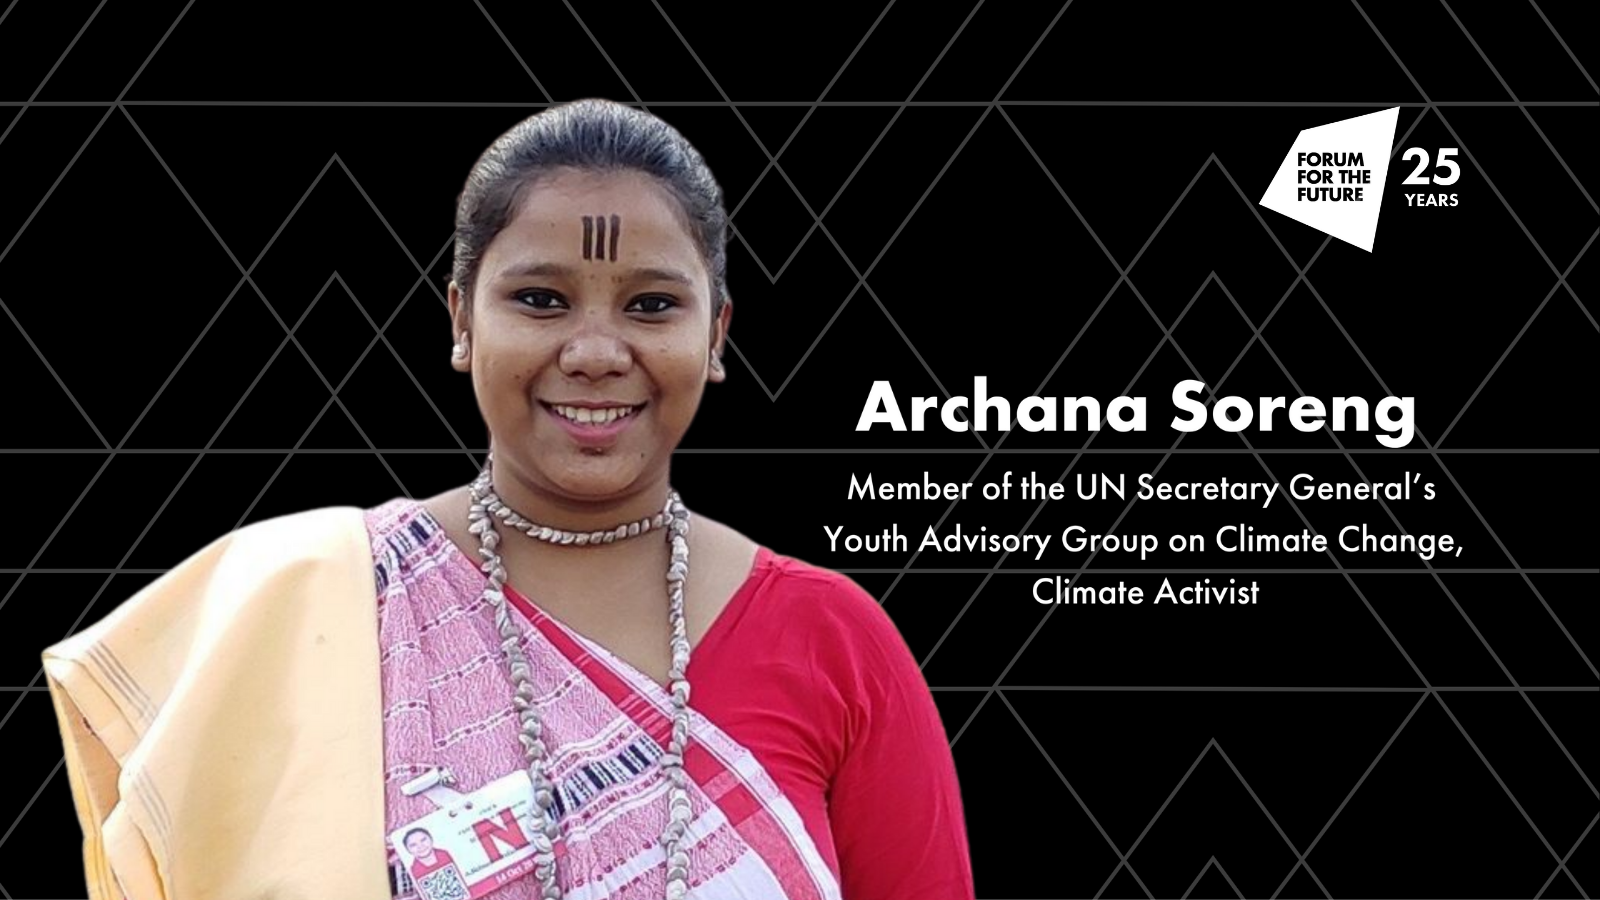 Differing worldviews, indigenous people and the front lines of climate action: Reflections from Archana Soreng